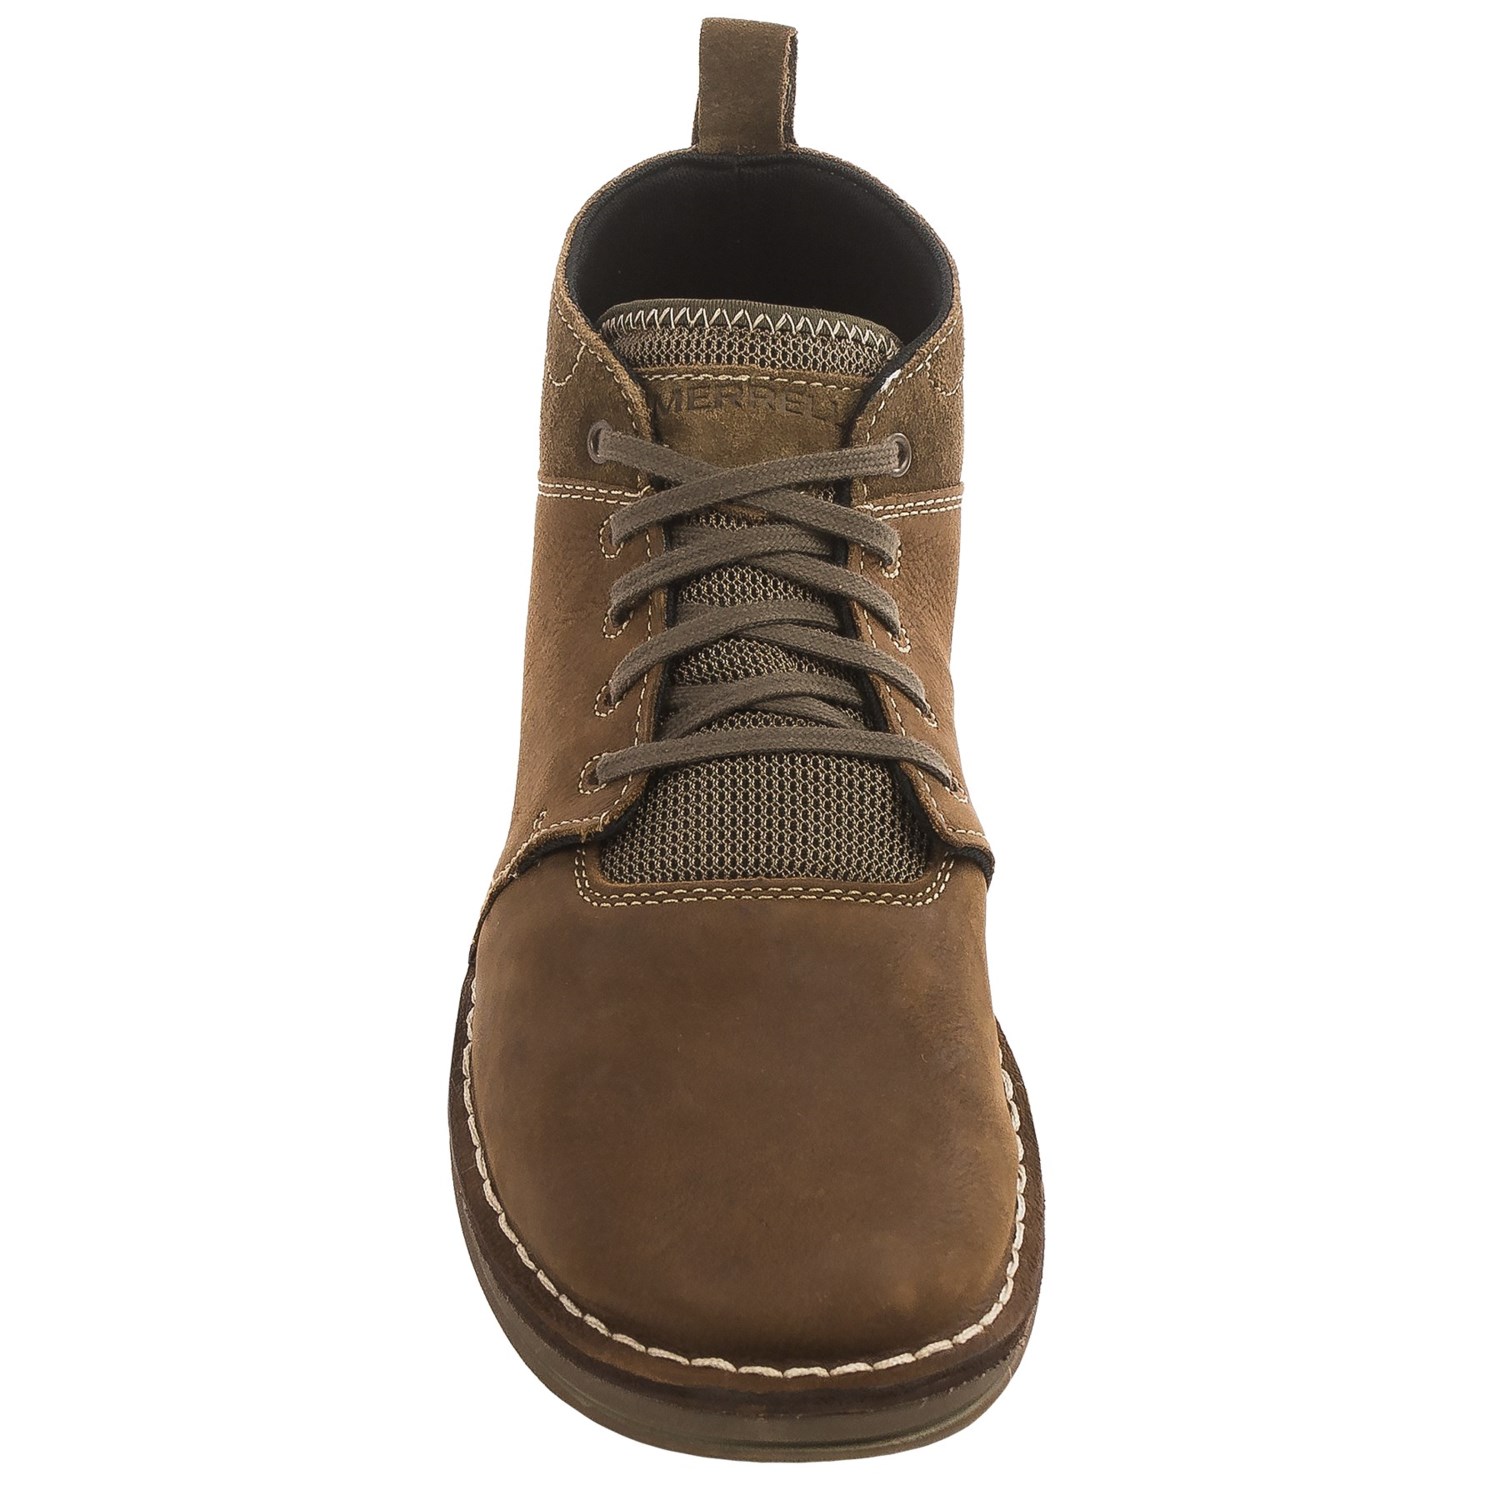 Merrell Bask Sol Mid Chukka Boots (For Men) - Save 55%